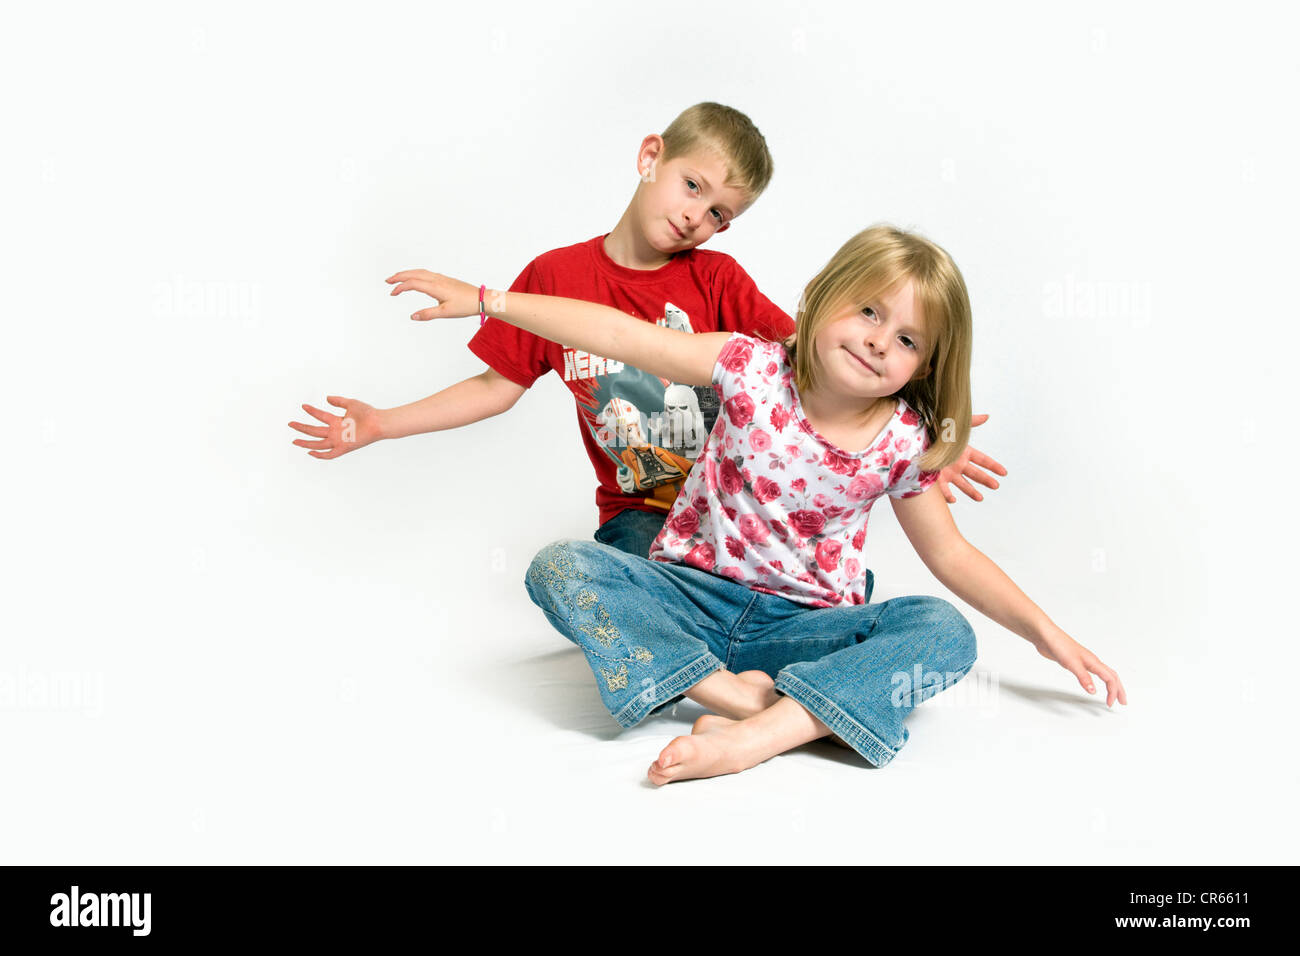 Two Caucasian children, a brother and sister having fun (7 year old girl and 8 year old boy) on a white background Stock Photo